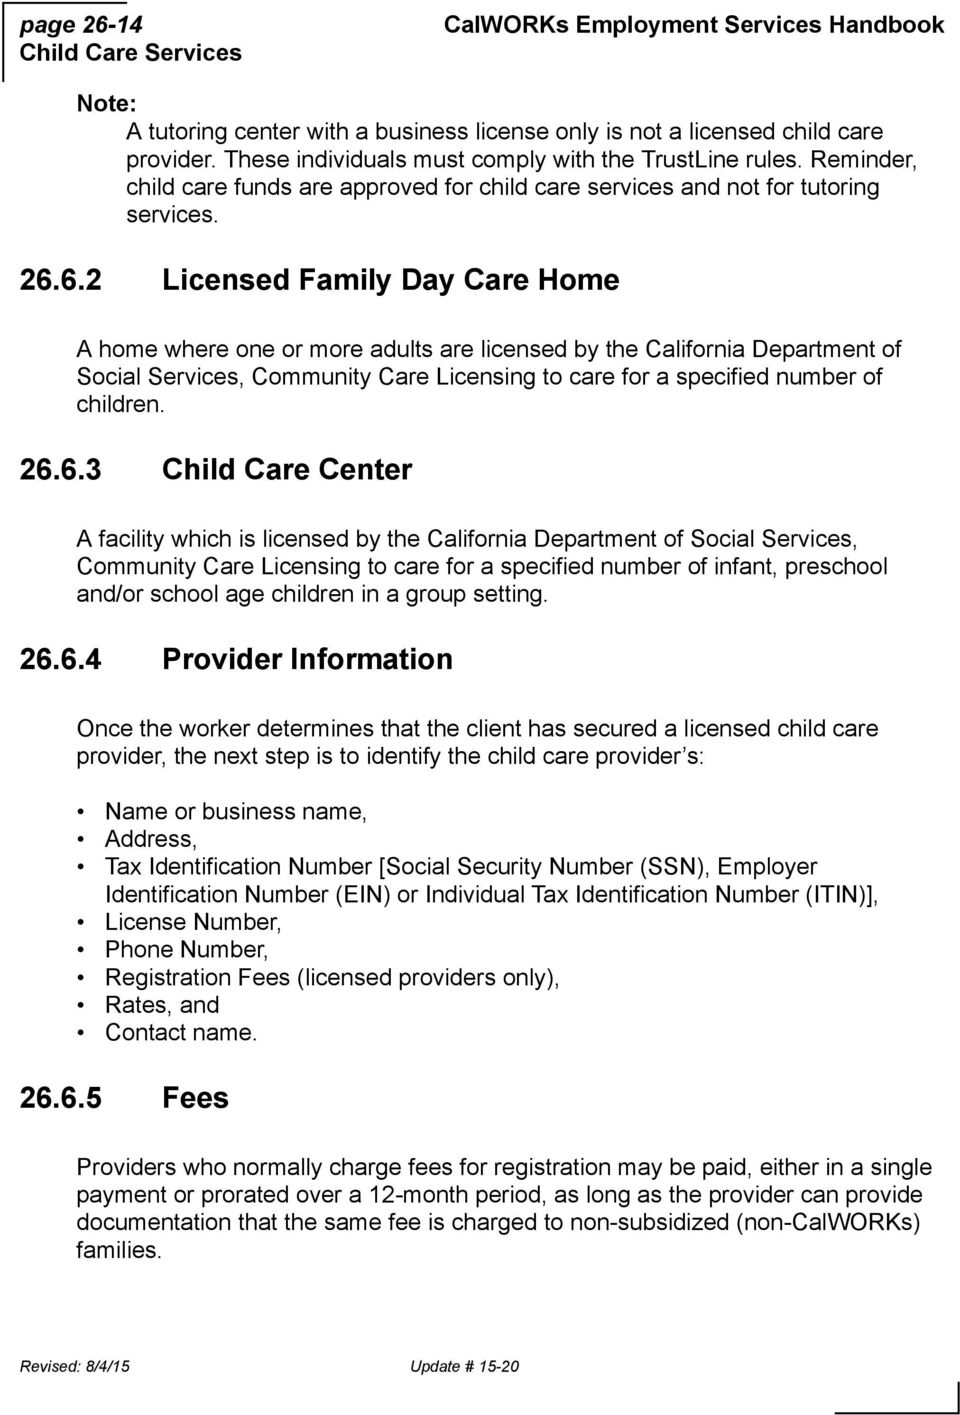 6.2 Licensed Family Day Care Home A home where one or more adults are licensed by the California Department of Social Services, Community Care Licensing to care for a specified number of children. 26.